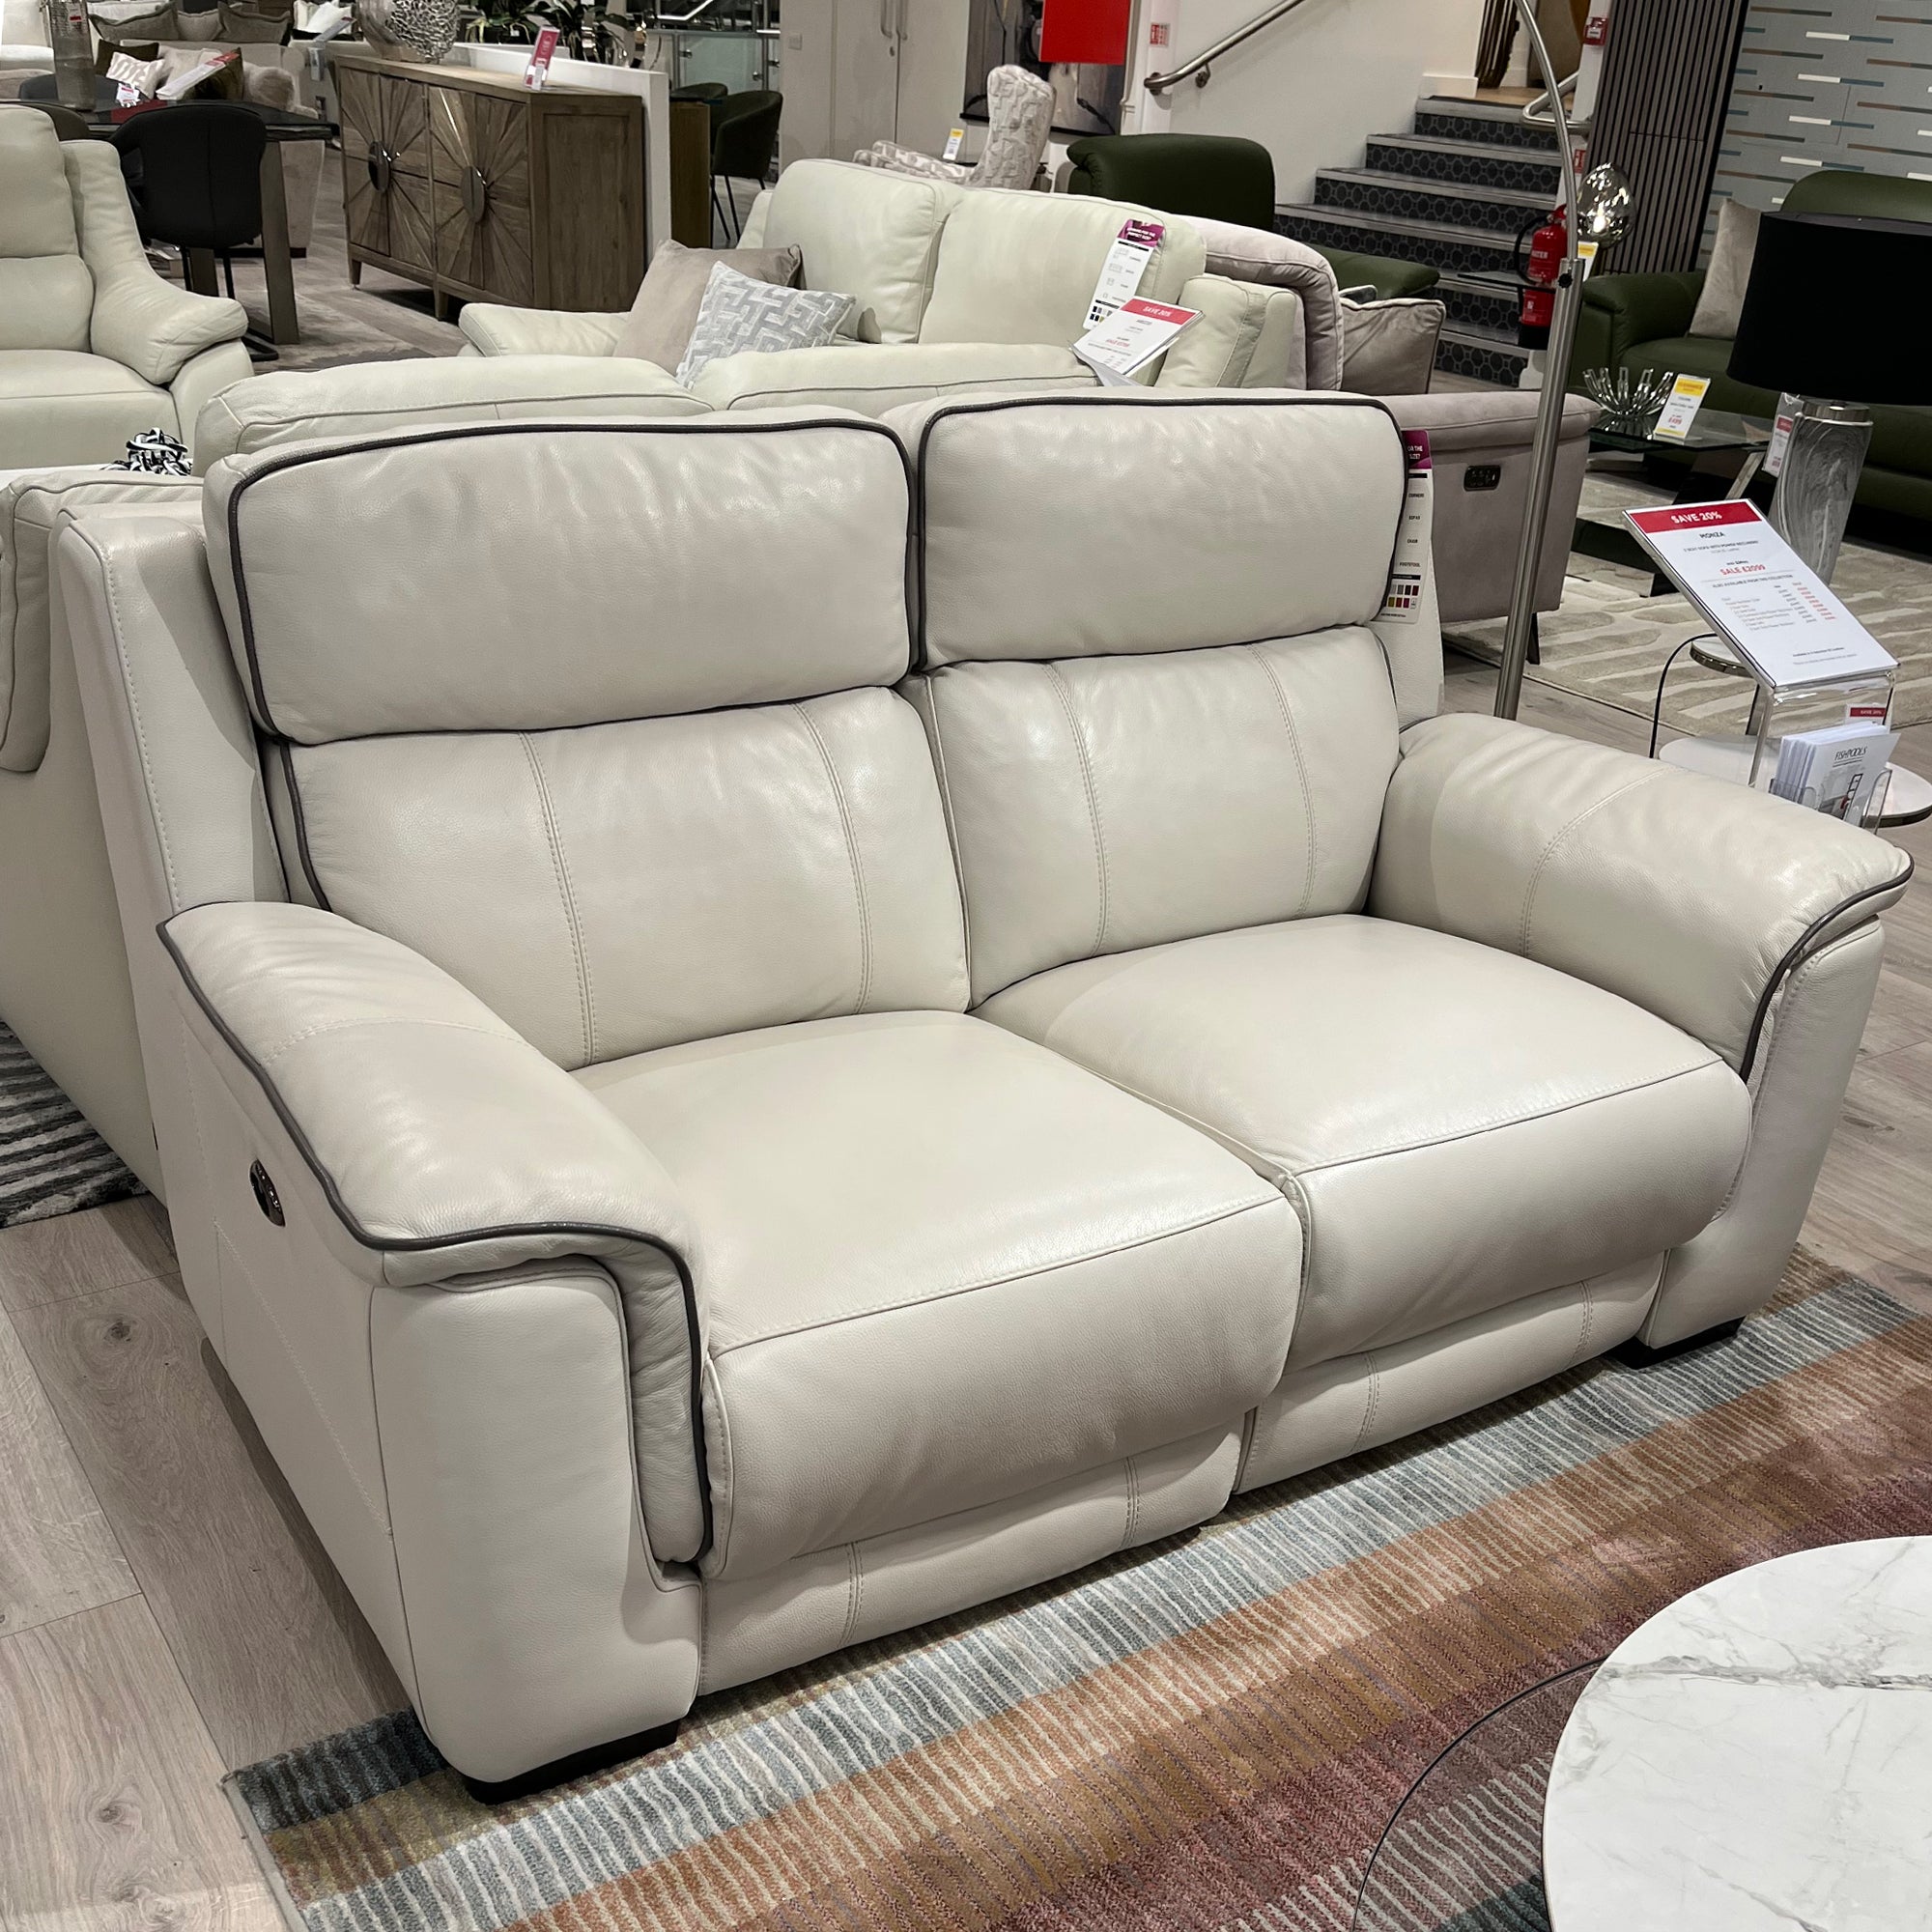 Monza 2 Seat Sofa With Double Power Recliner In CAT 25 Leather NC 156E Frost/NC 042E Elephant